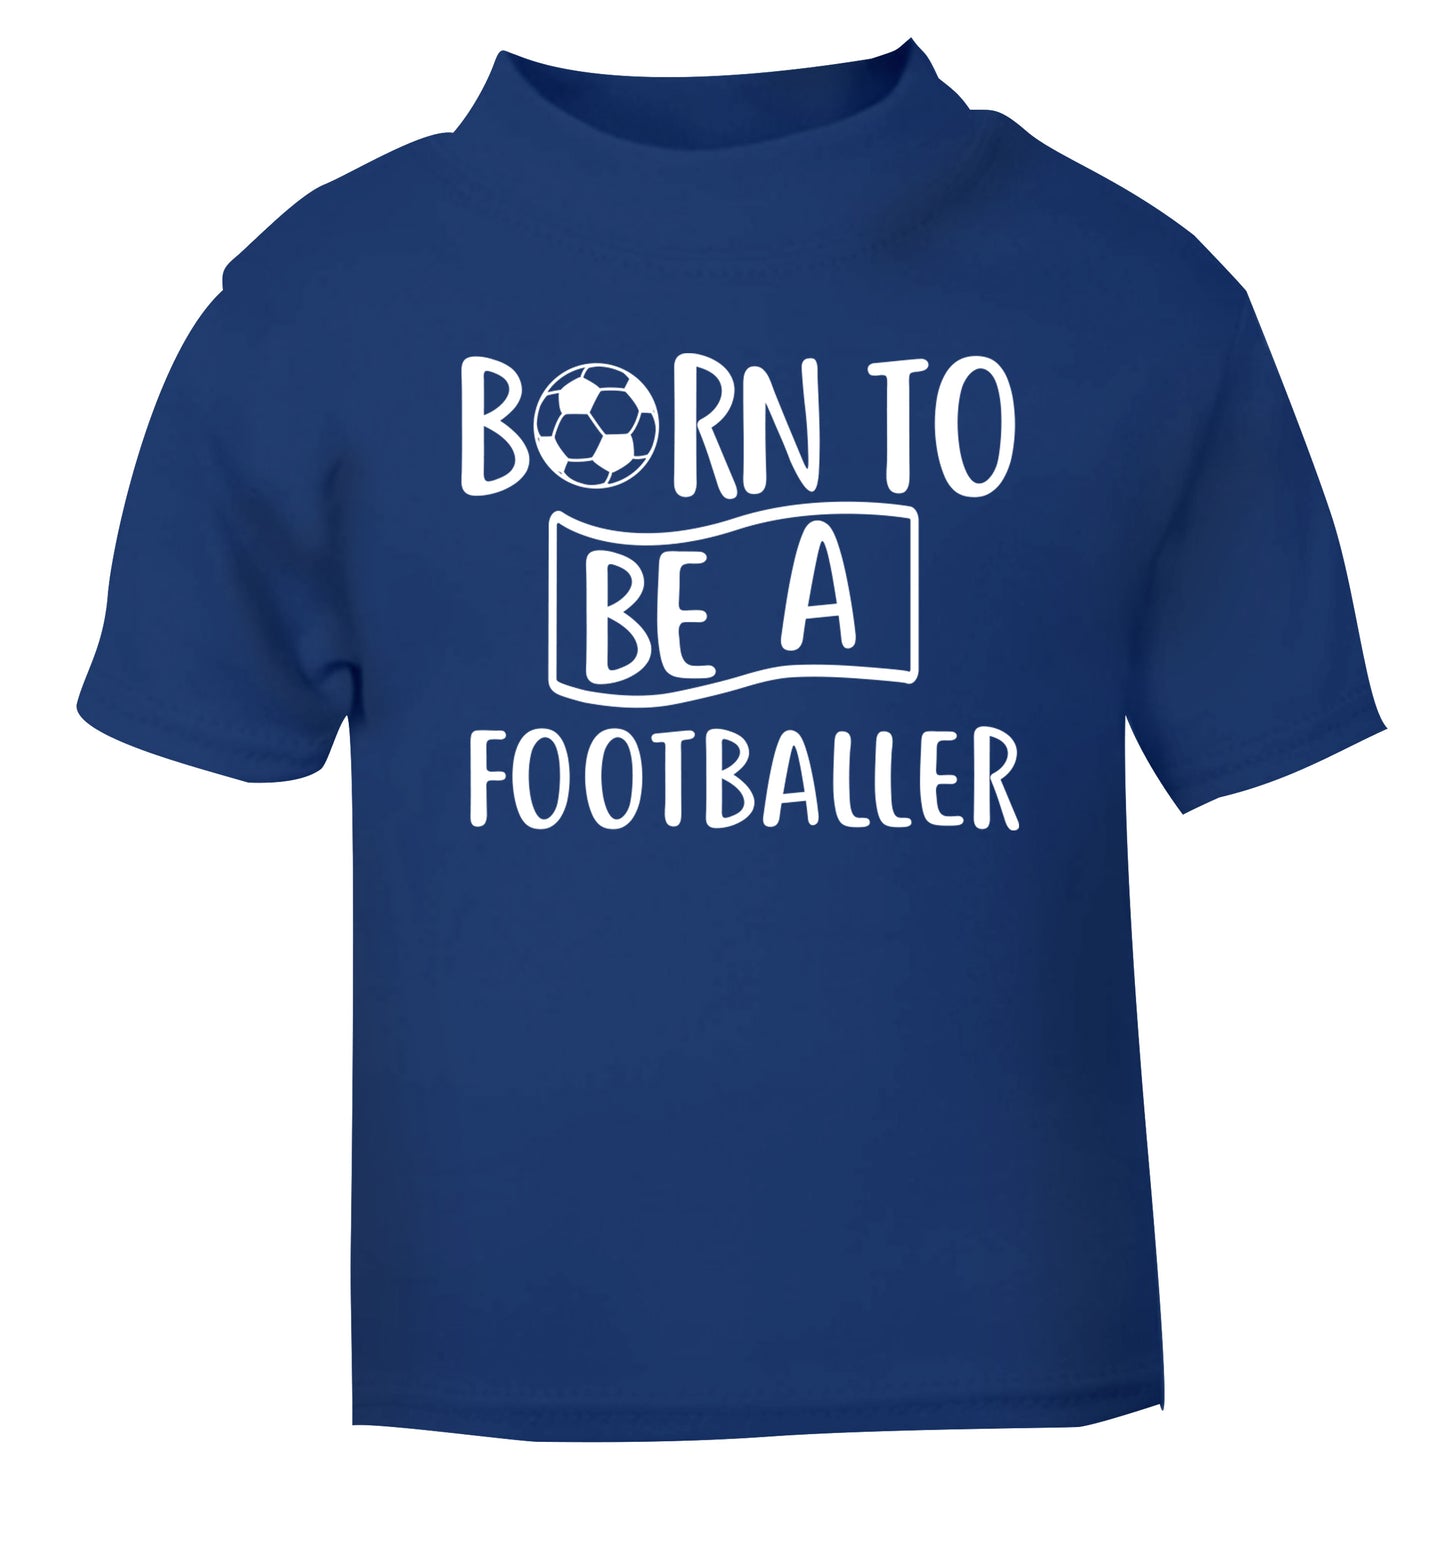 Born to be a footballer blue Baby Toddler Tshirt 2 Years